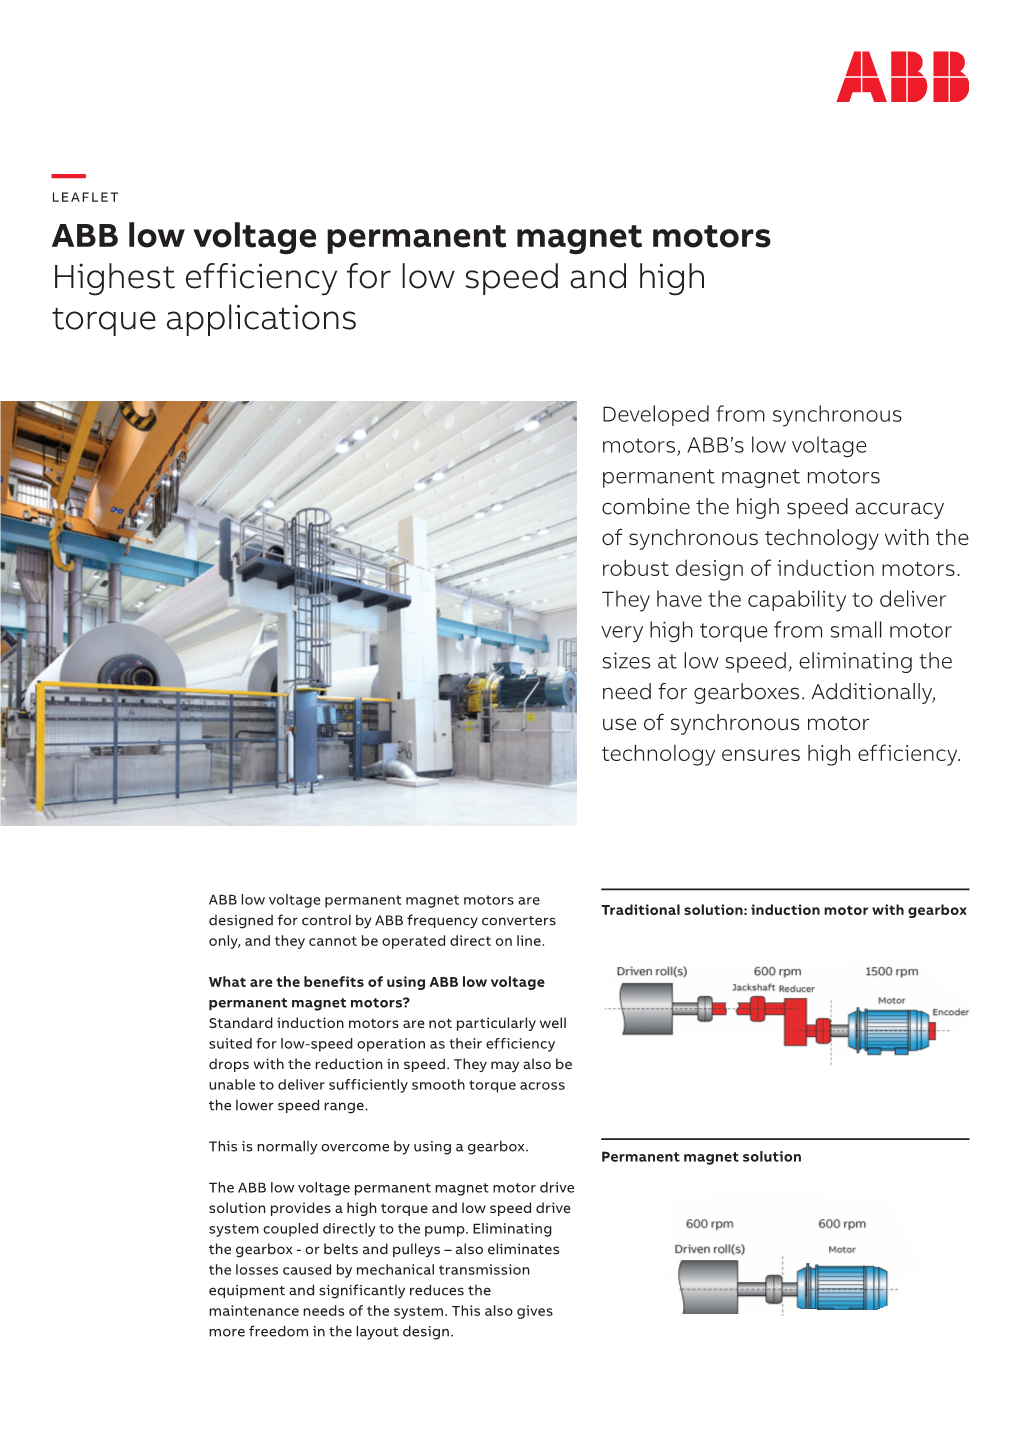 ABB Low Voltage Permanent Magnet Motors Highest Efficiency for Low Speed and High Torque Applications